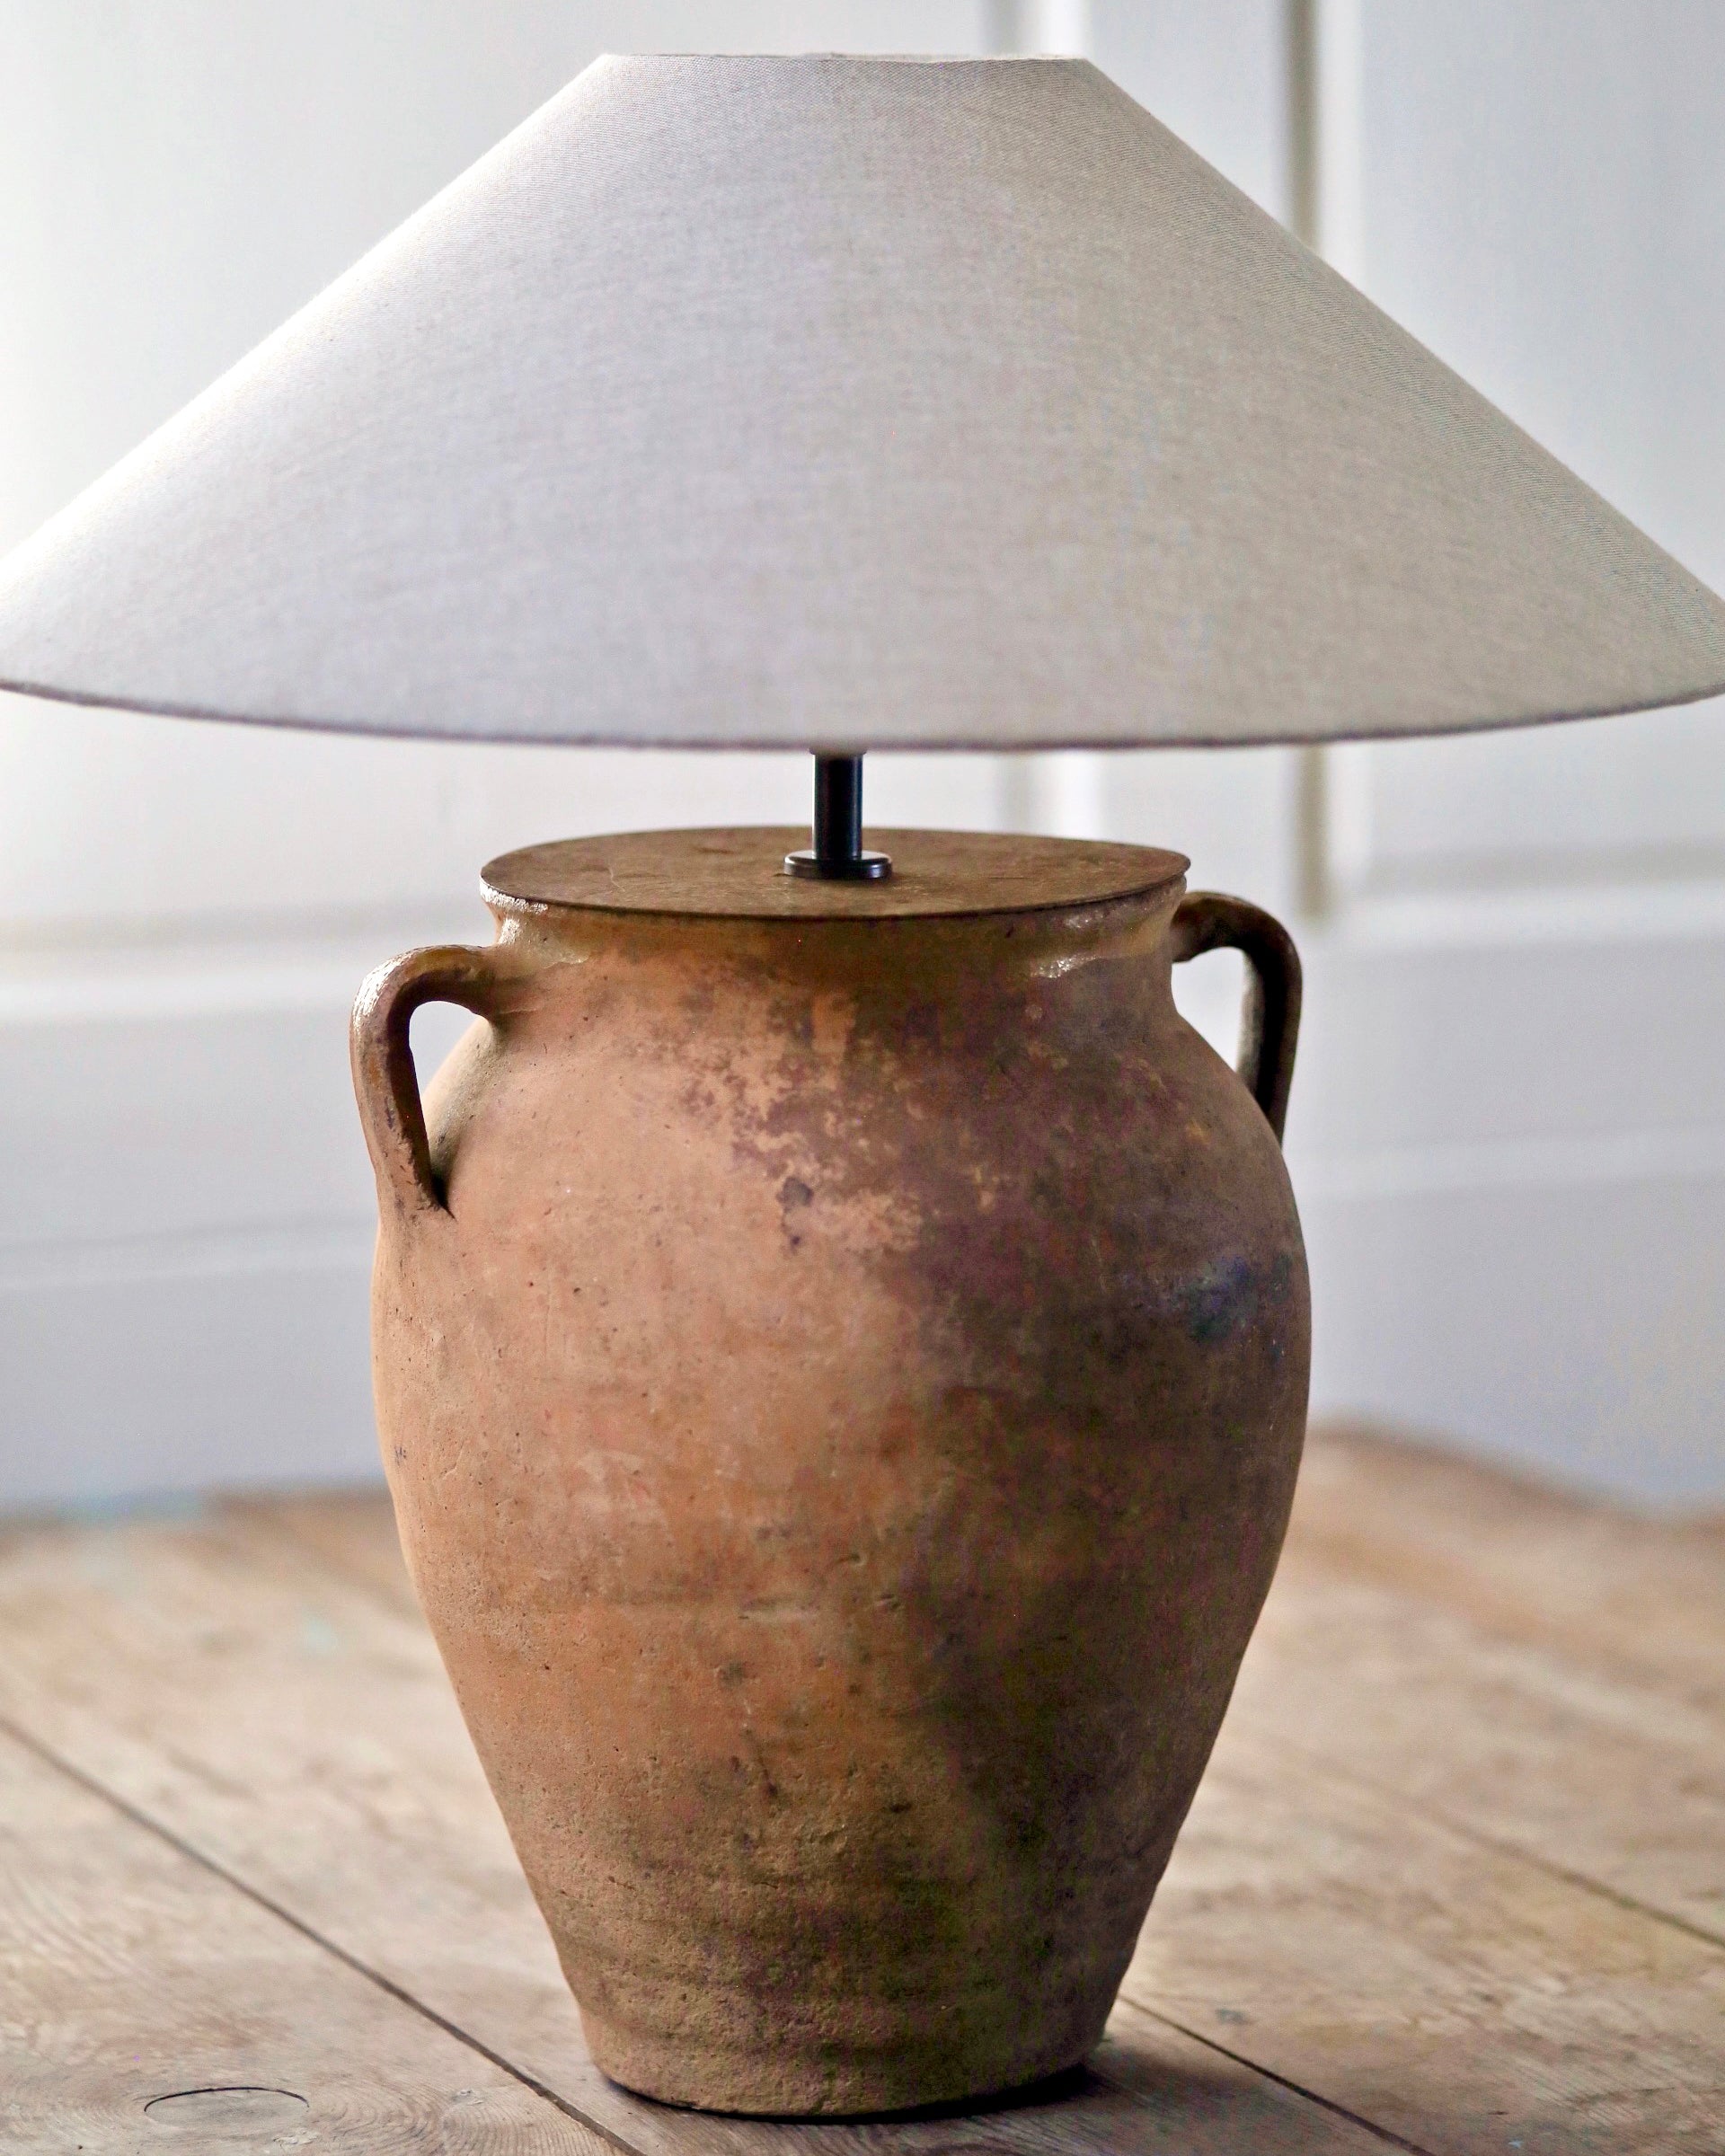 Antique rustic clay table lamp 